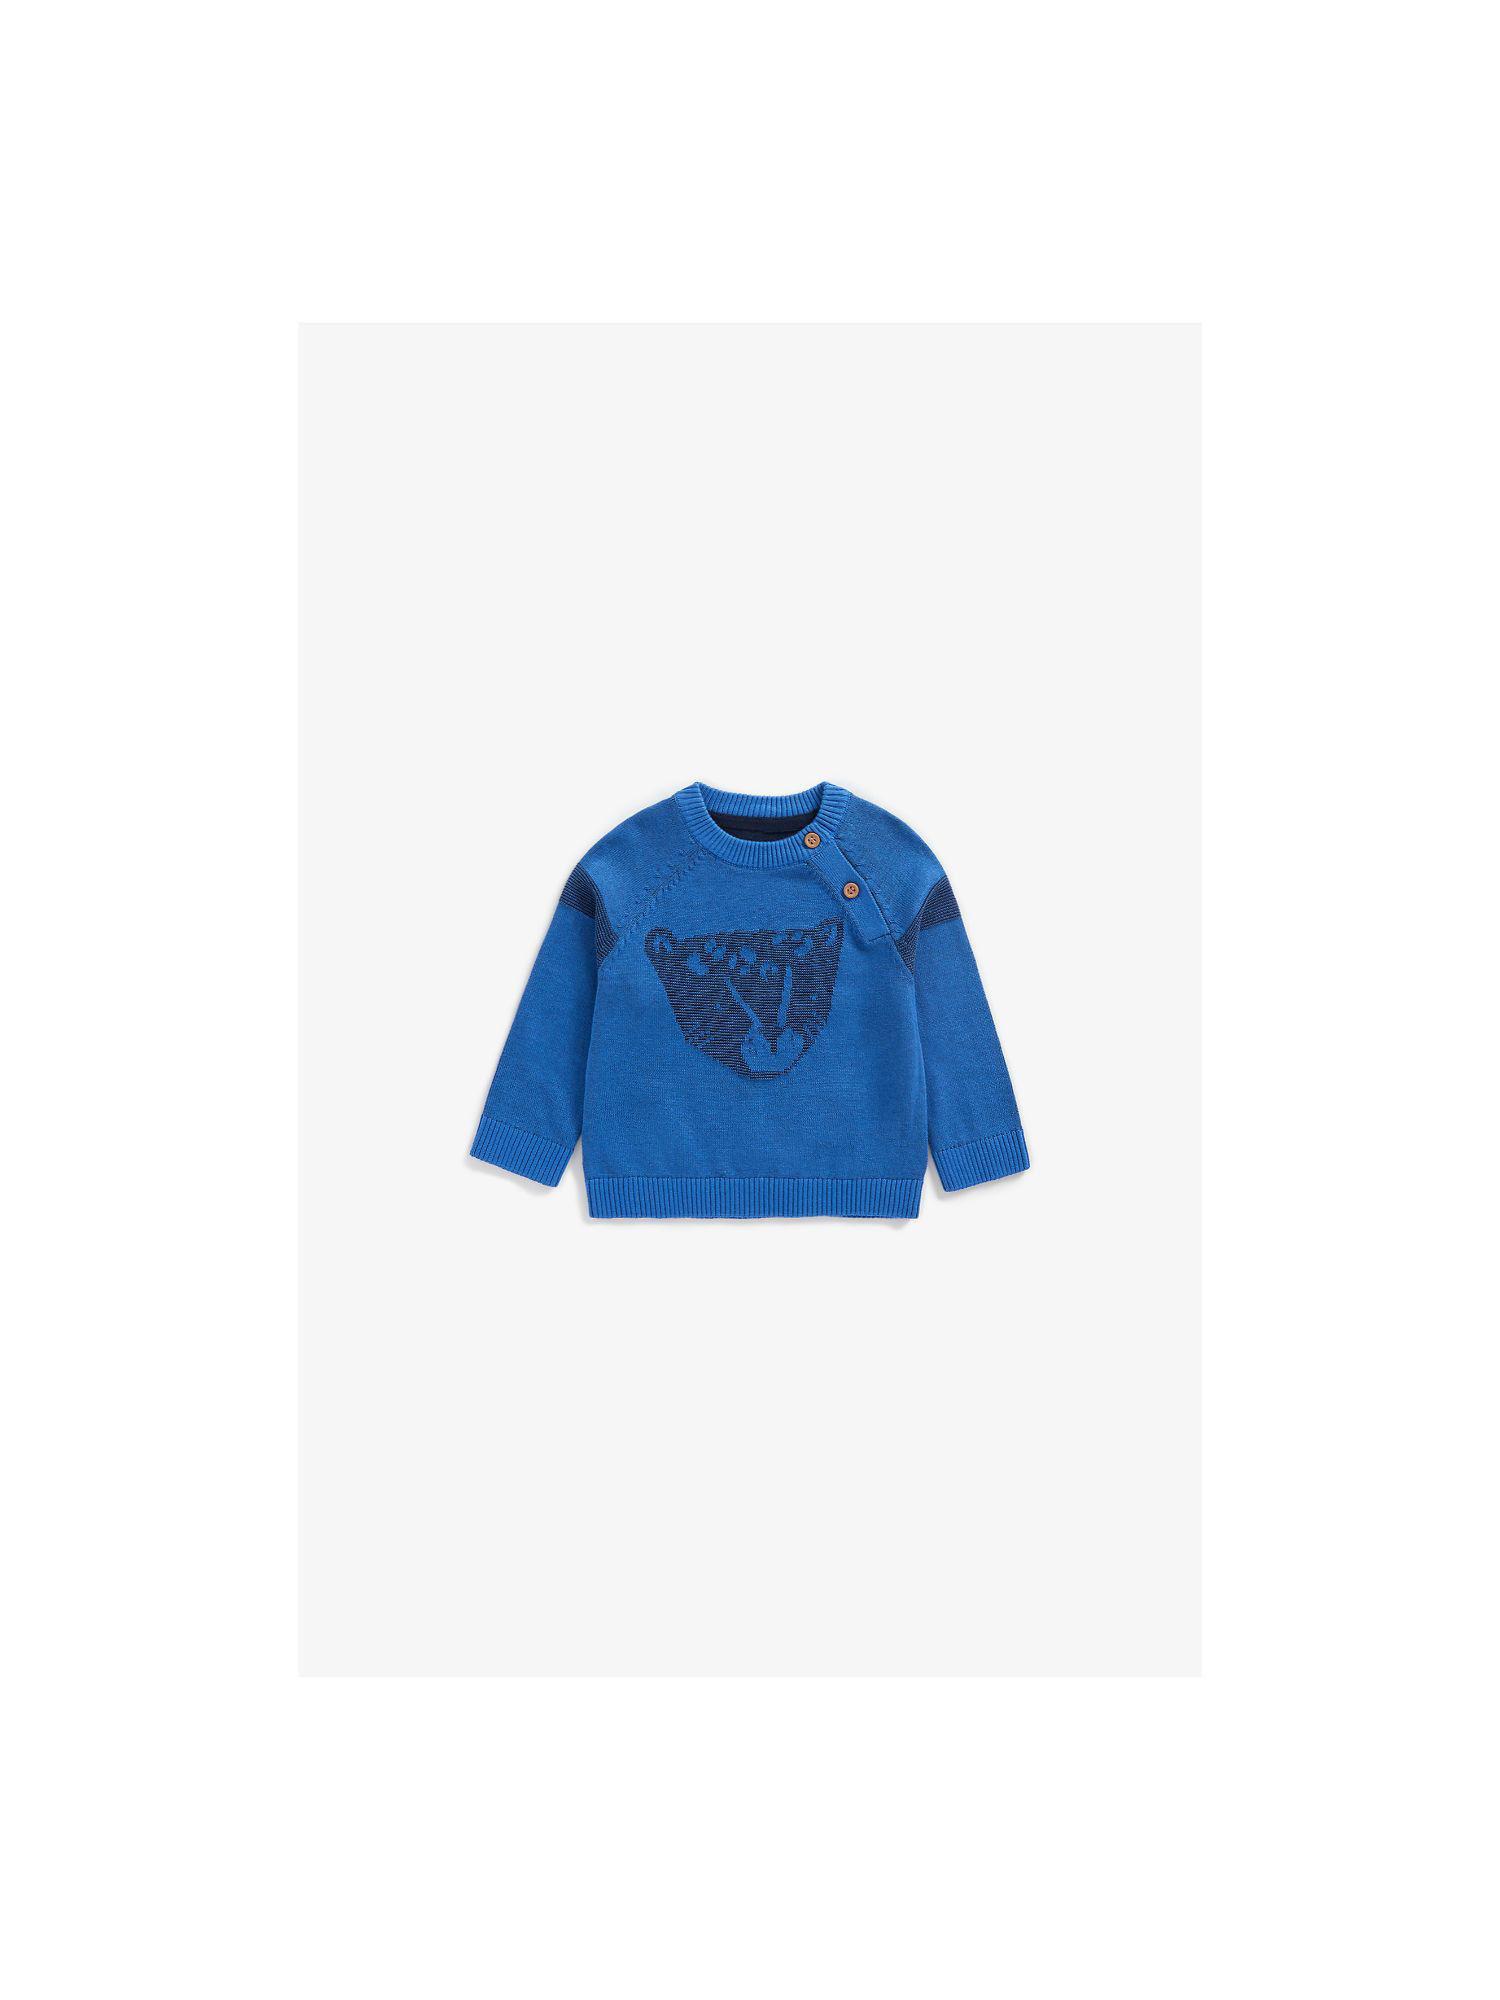 mother-care-mb-cm-blue-leopard-face-knit-sweater